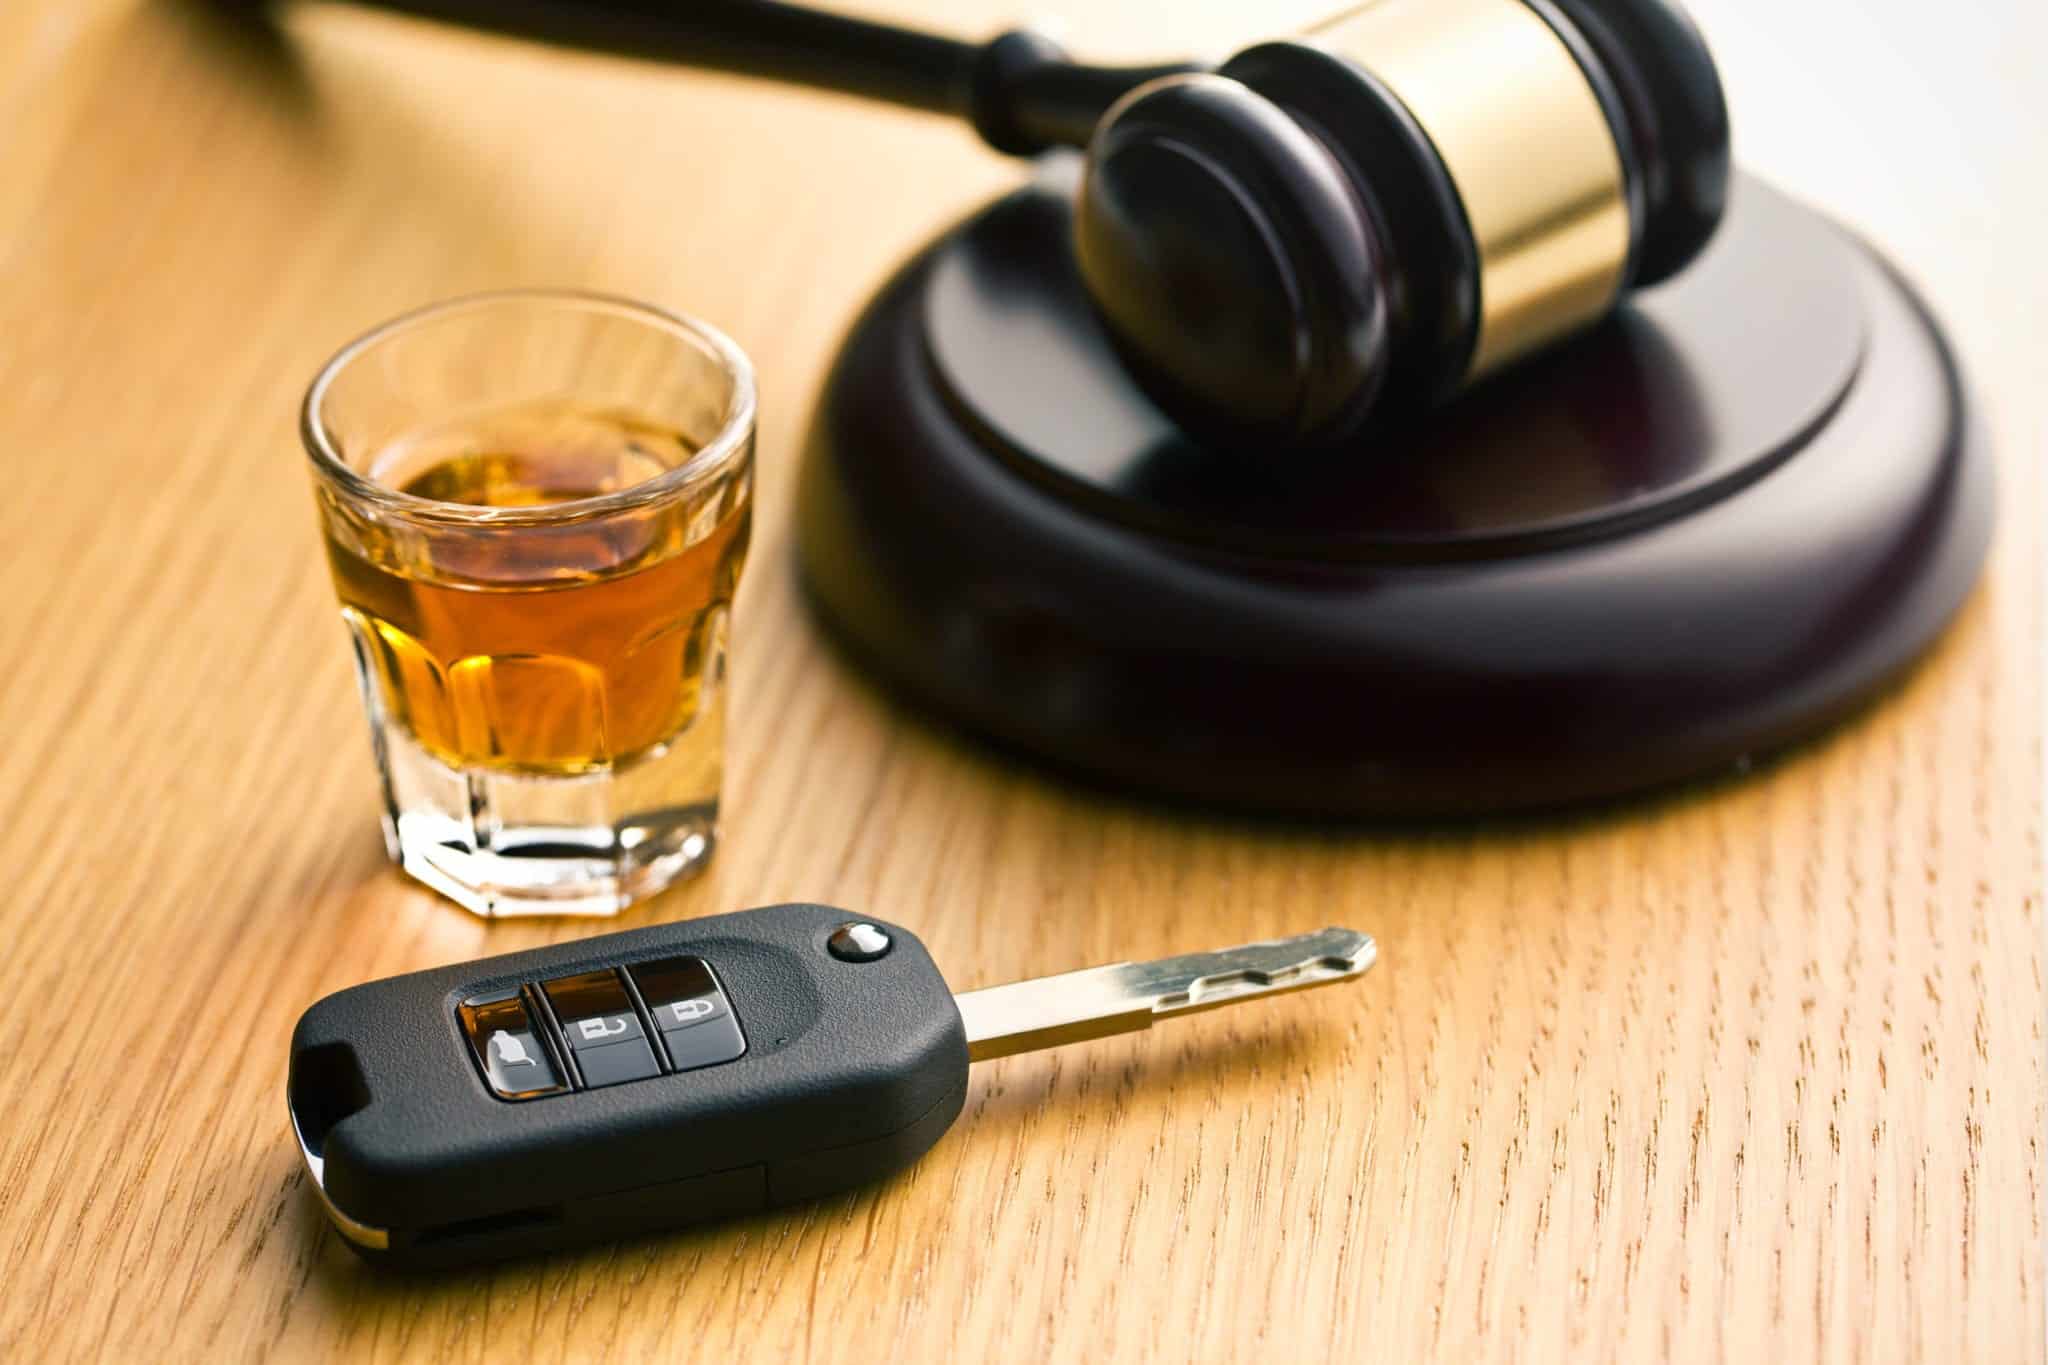 DWI: Should It Be a Crime to Refuse Blood and Breath Testing?